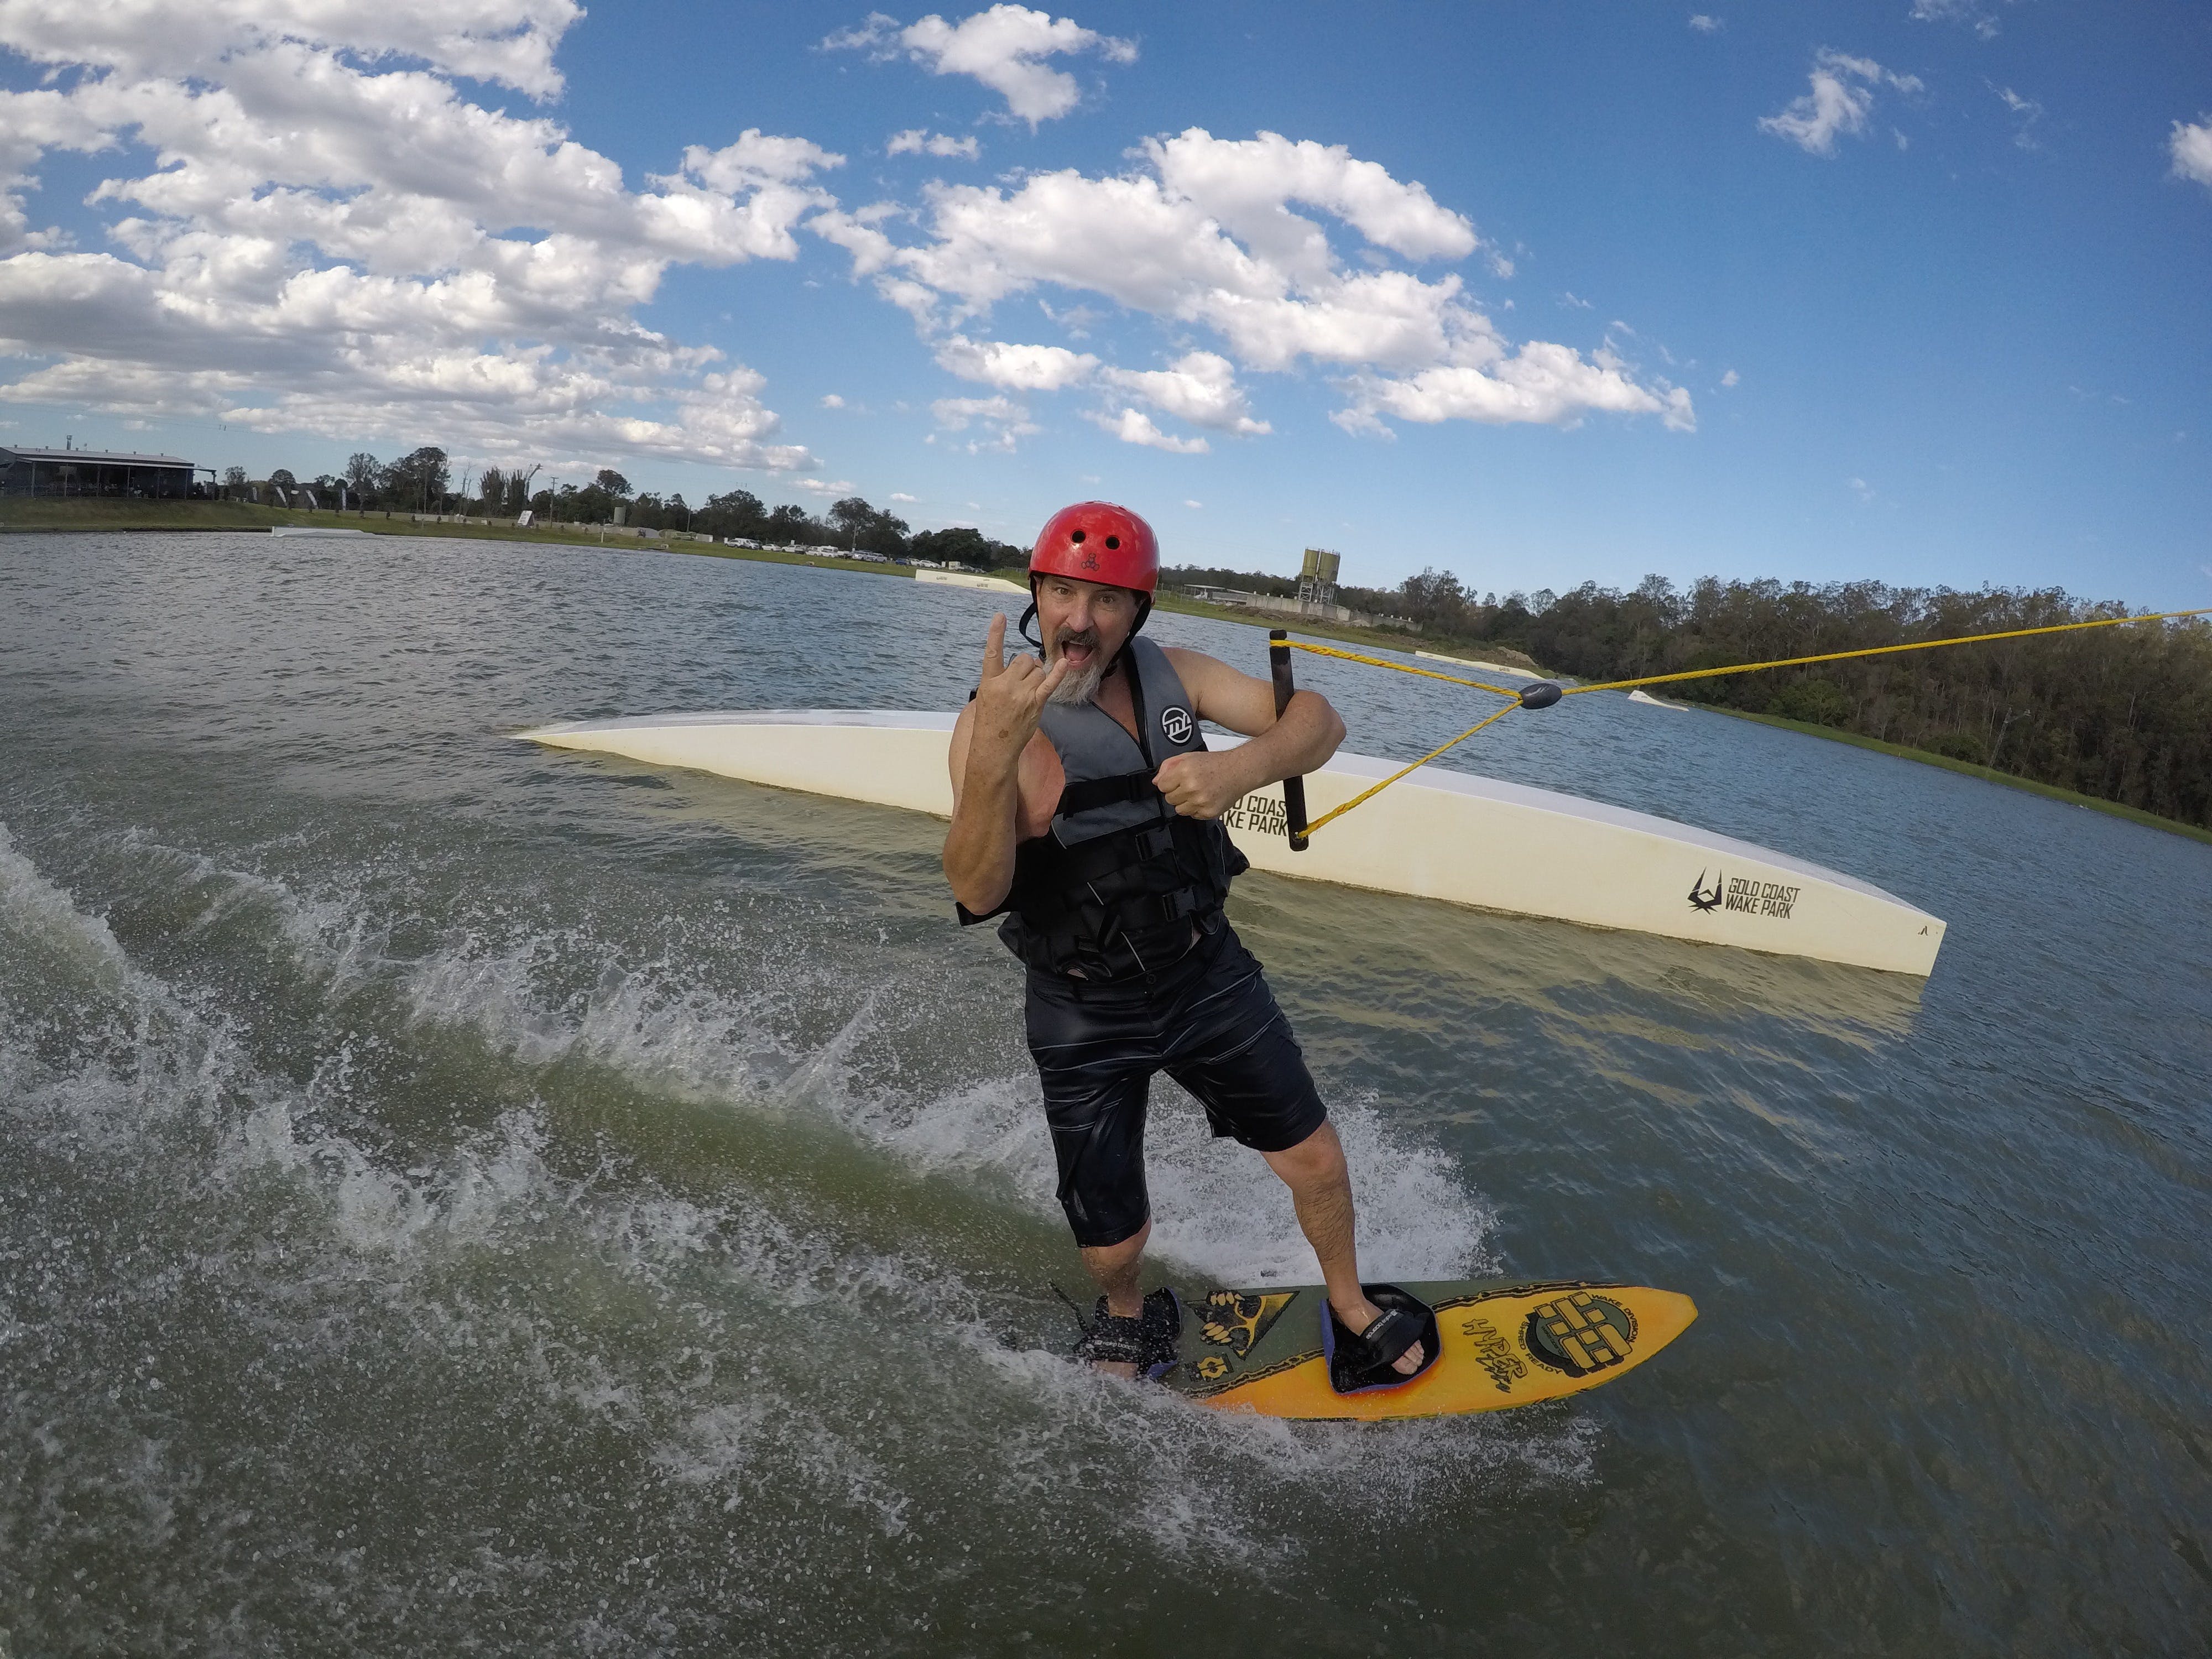 GC Wake Park - Attractions Melbourne